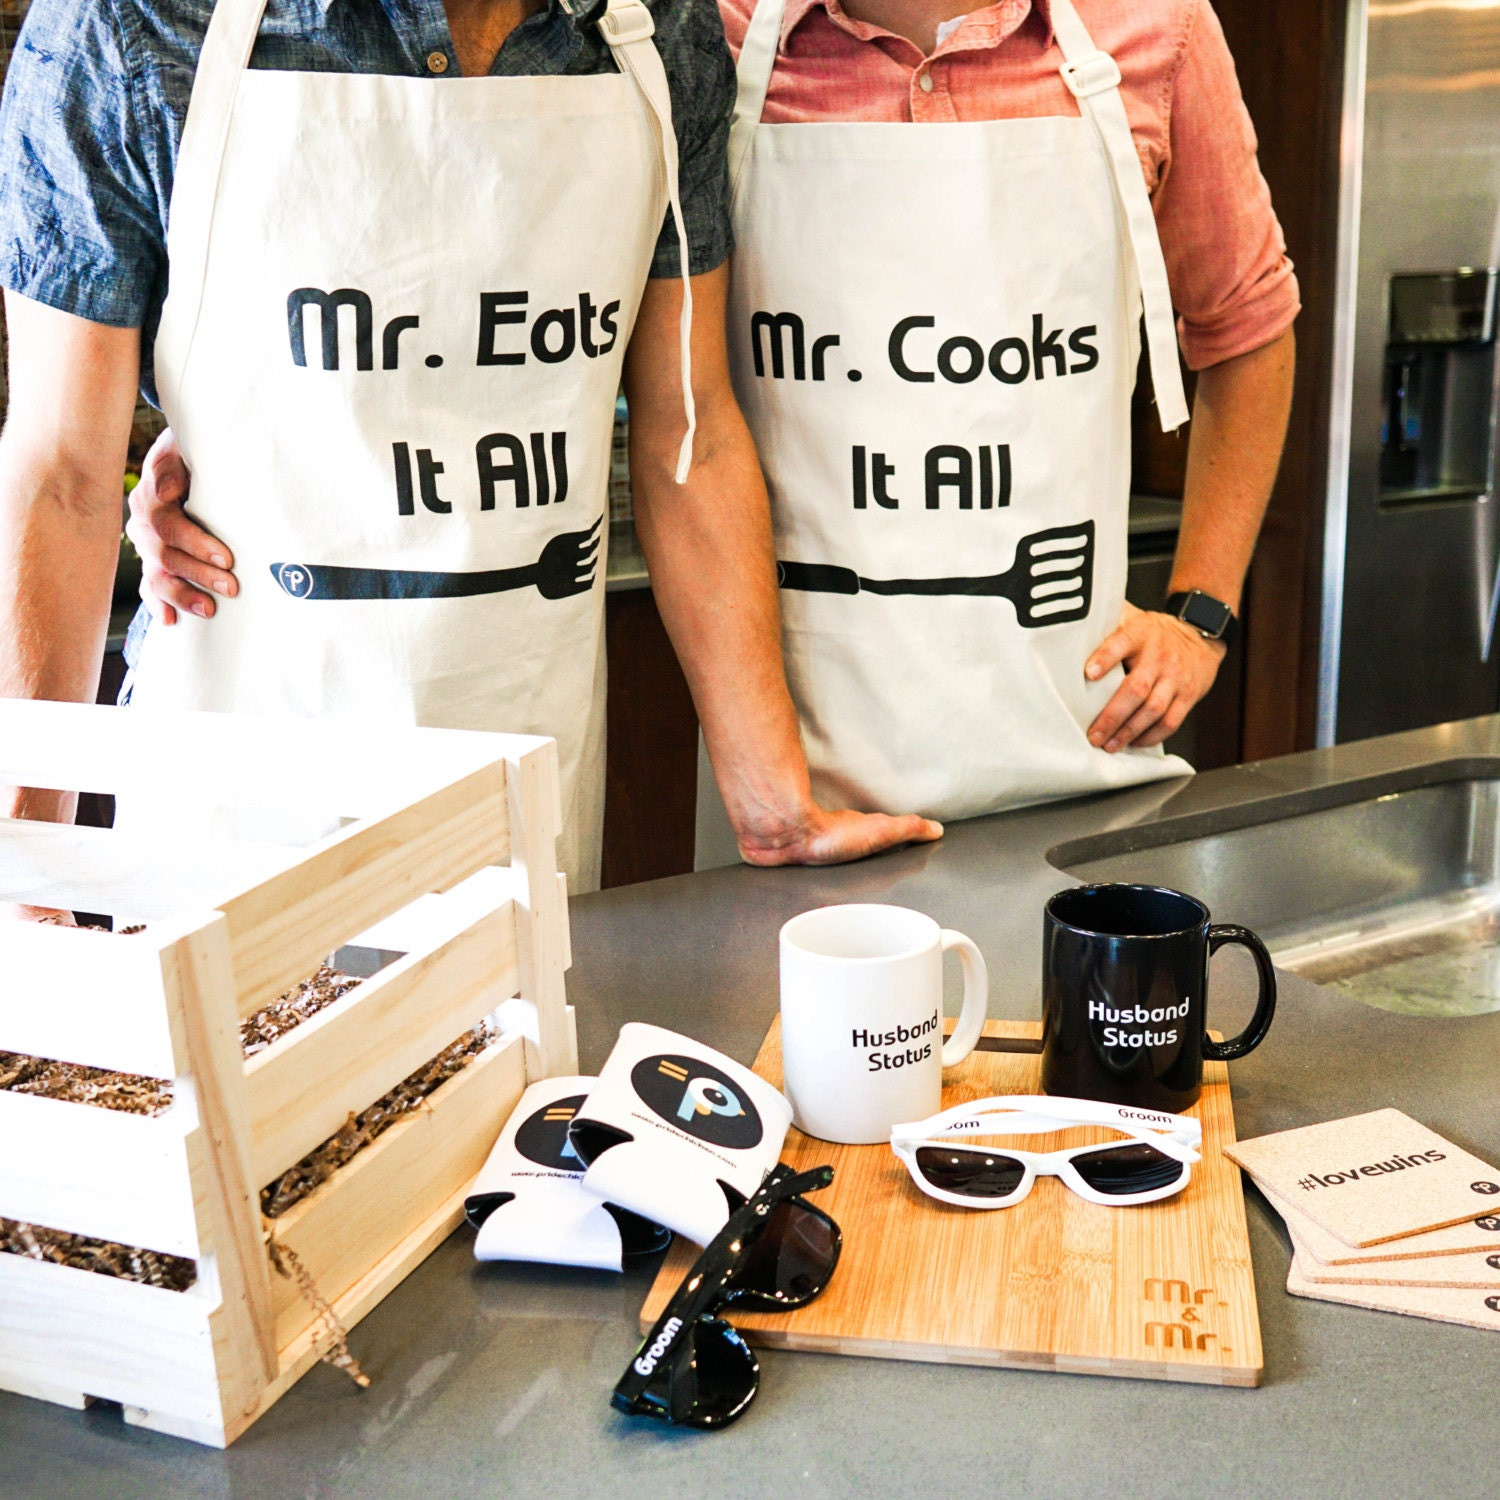 Wedding Gift Ideas For Gay Couple
 Gay Couple Kitchen Crate Makes a Great Gay Wedding Gift